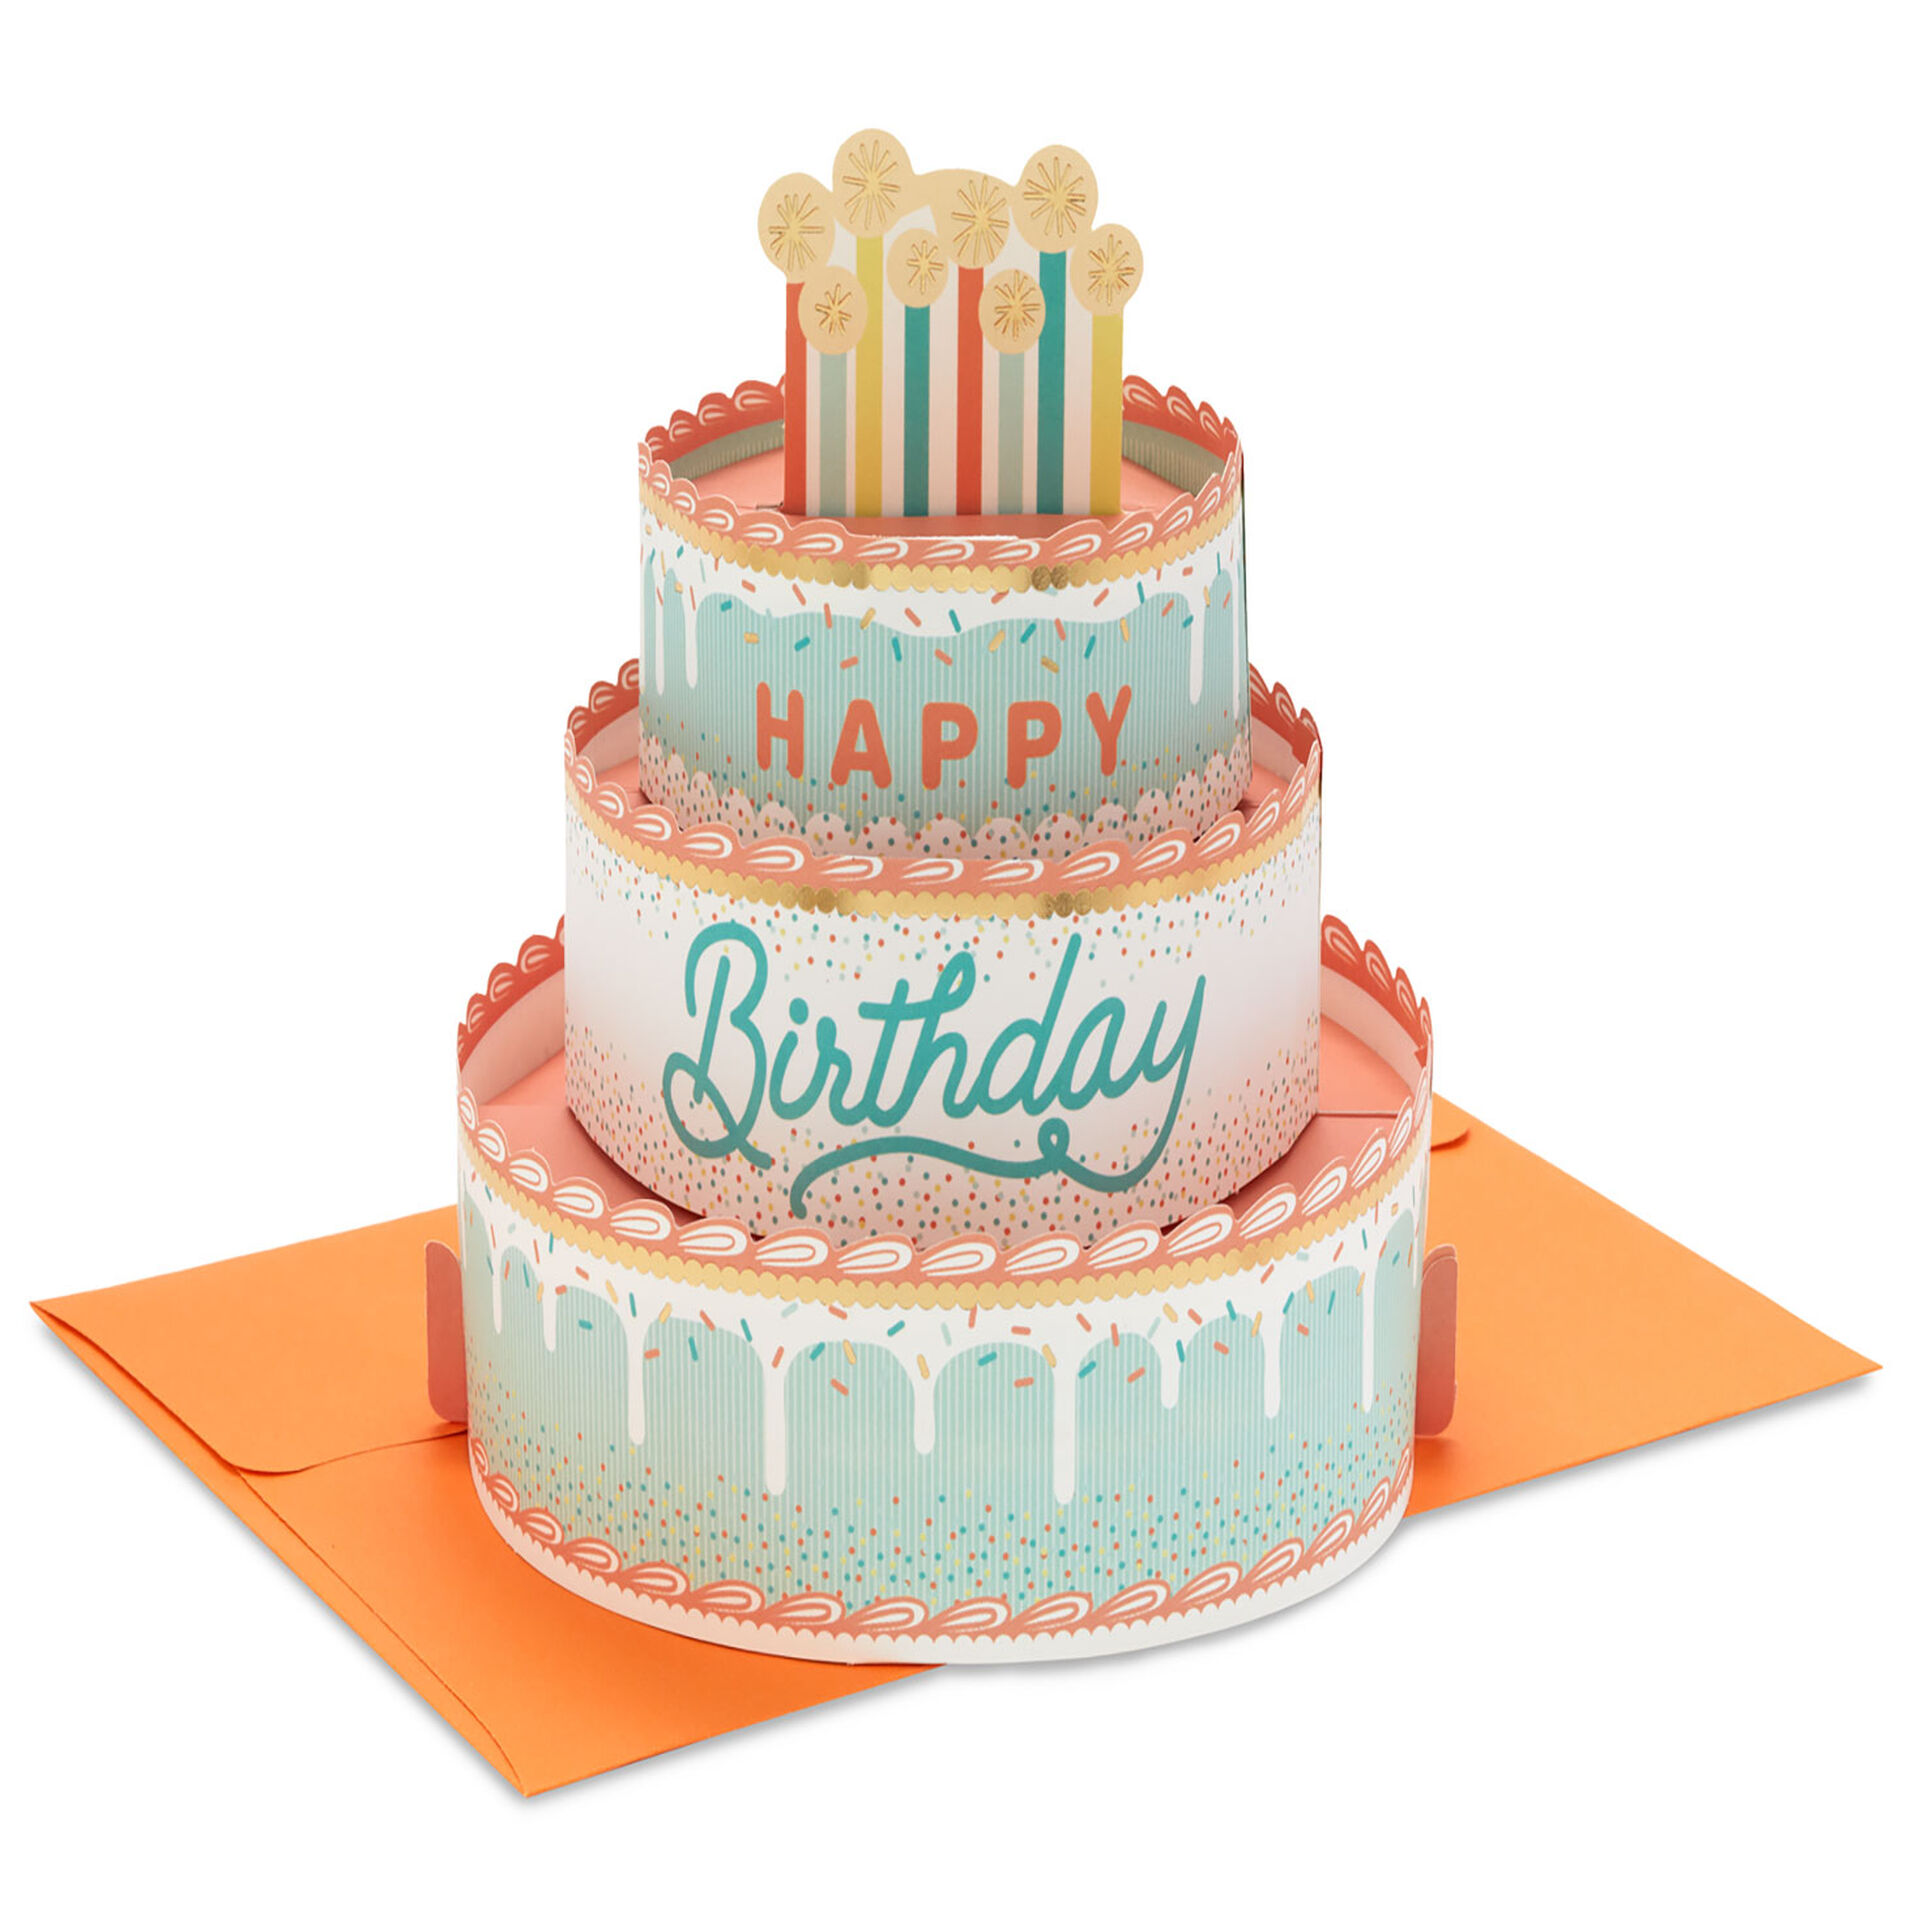 Tiered-Birthday-Cake-3D-PopUp-Card_799WDR1214_01